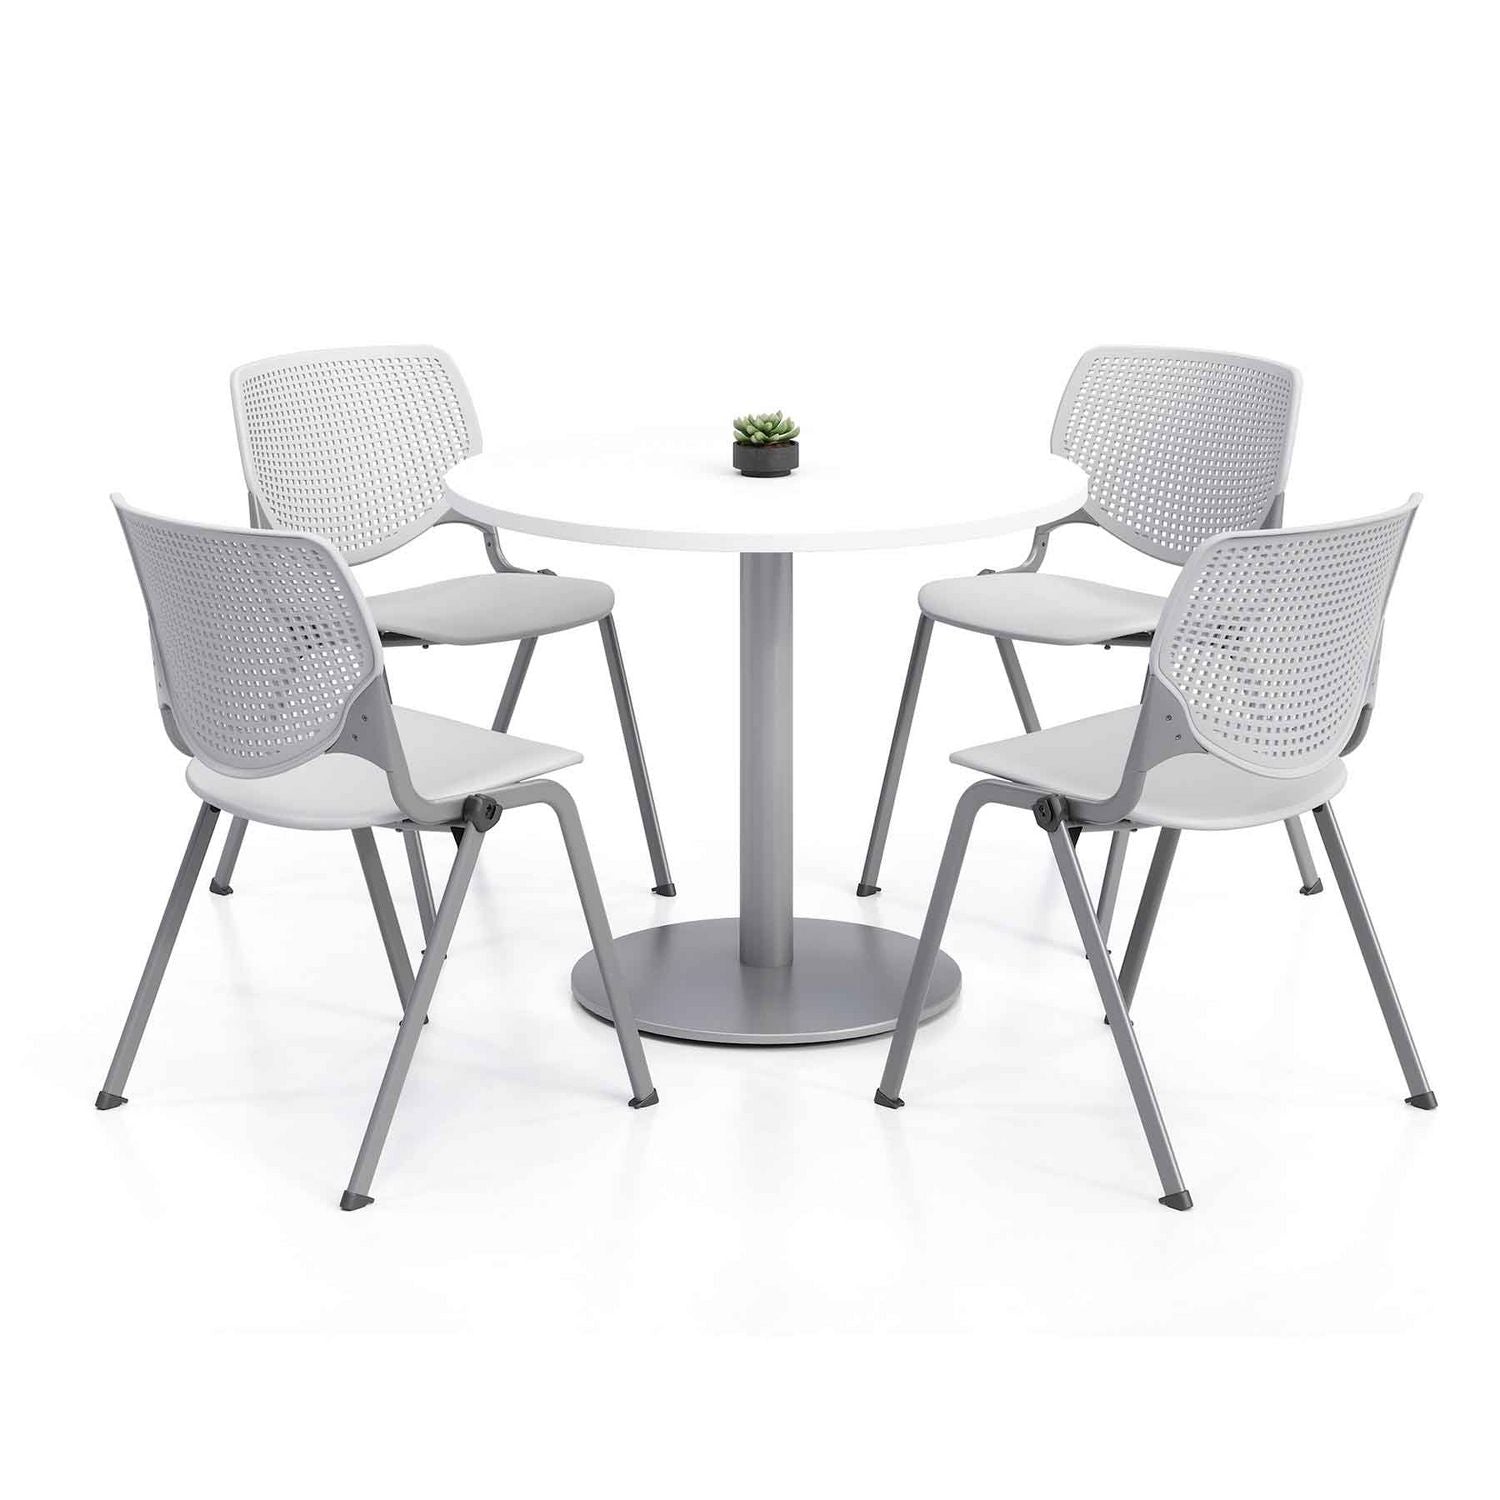 pedestal-table-with-four-light-gray-kool-series-chairs-round-36-dia-x-29h-designer-white-ships-in-4-6-business-days_kfi811774036719 - 1